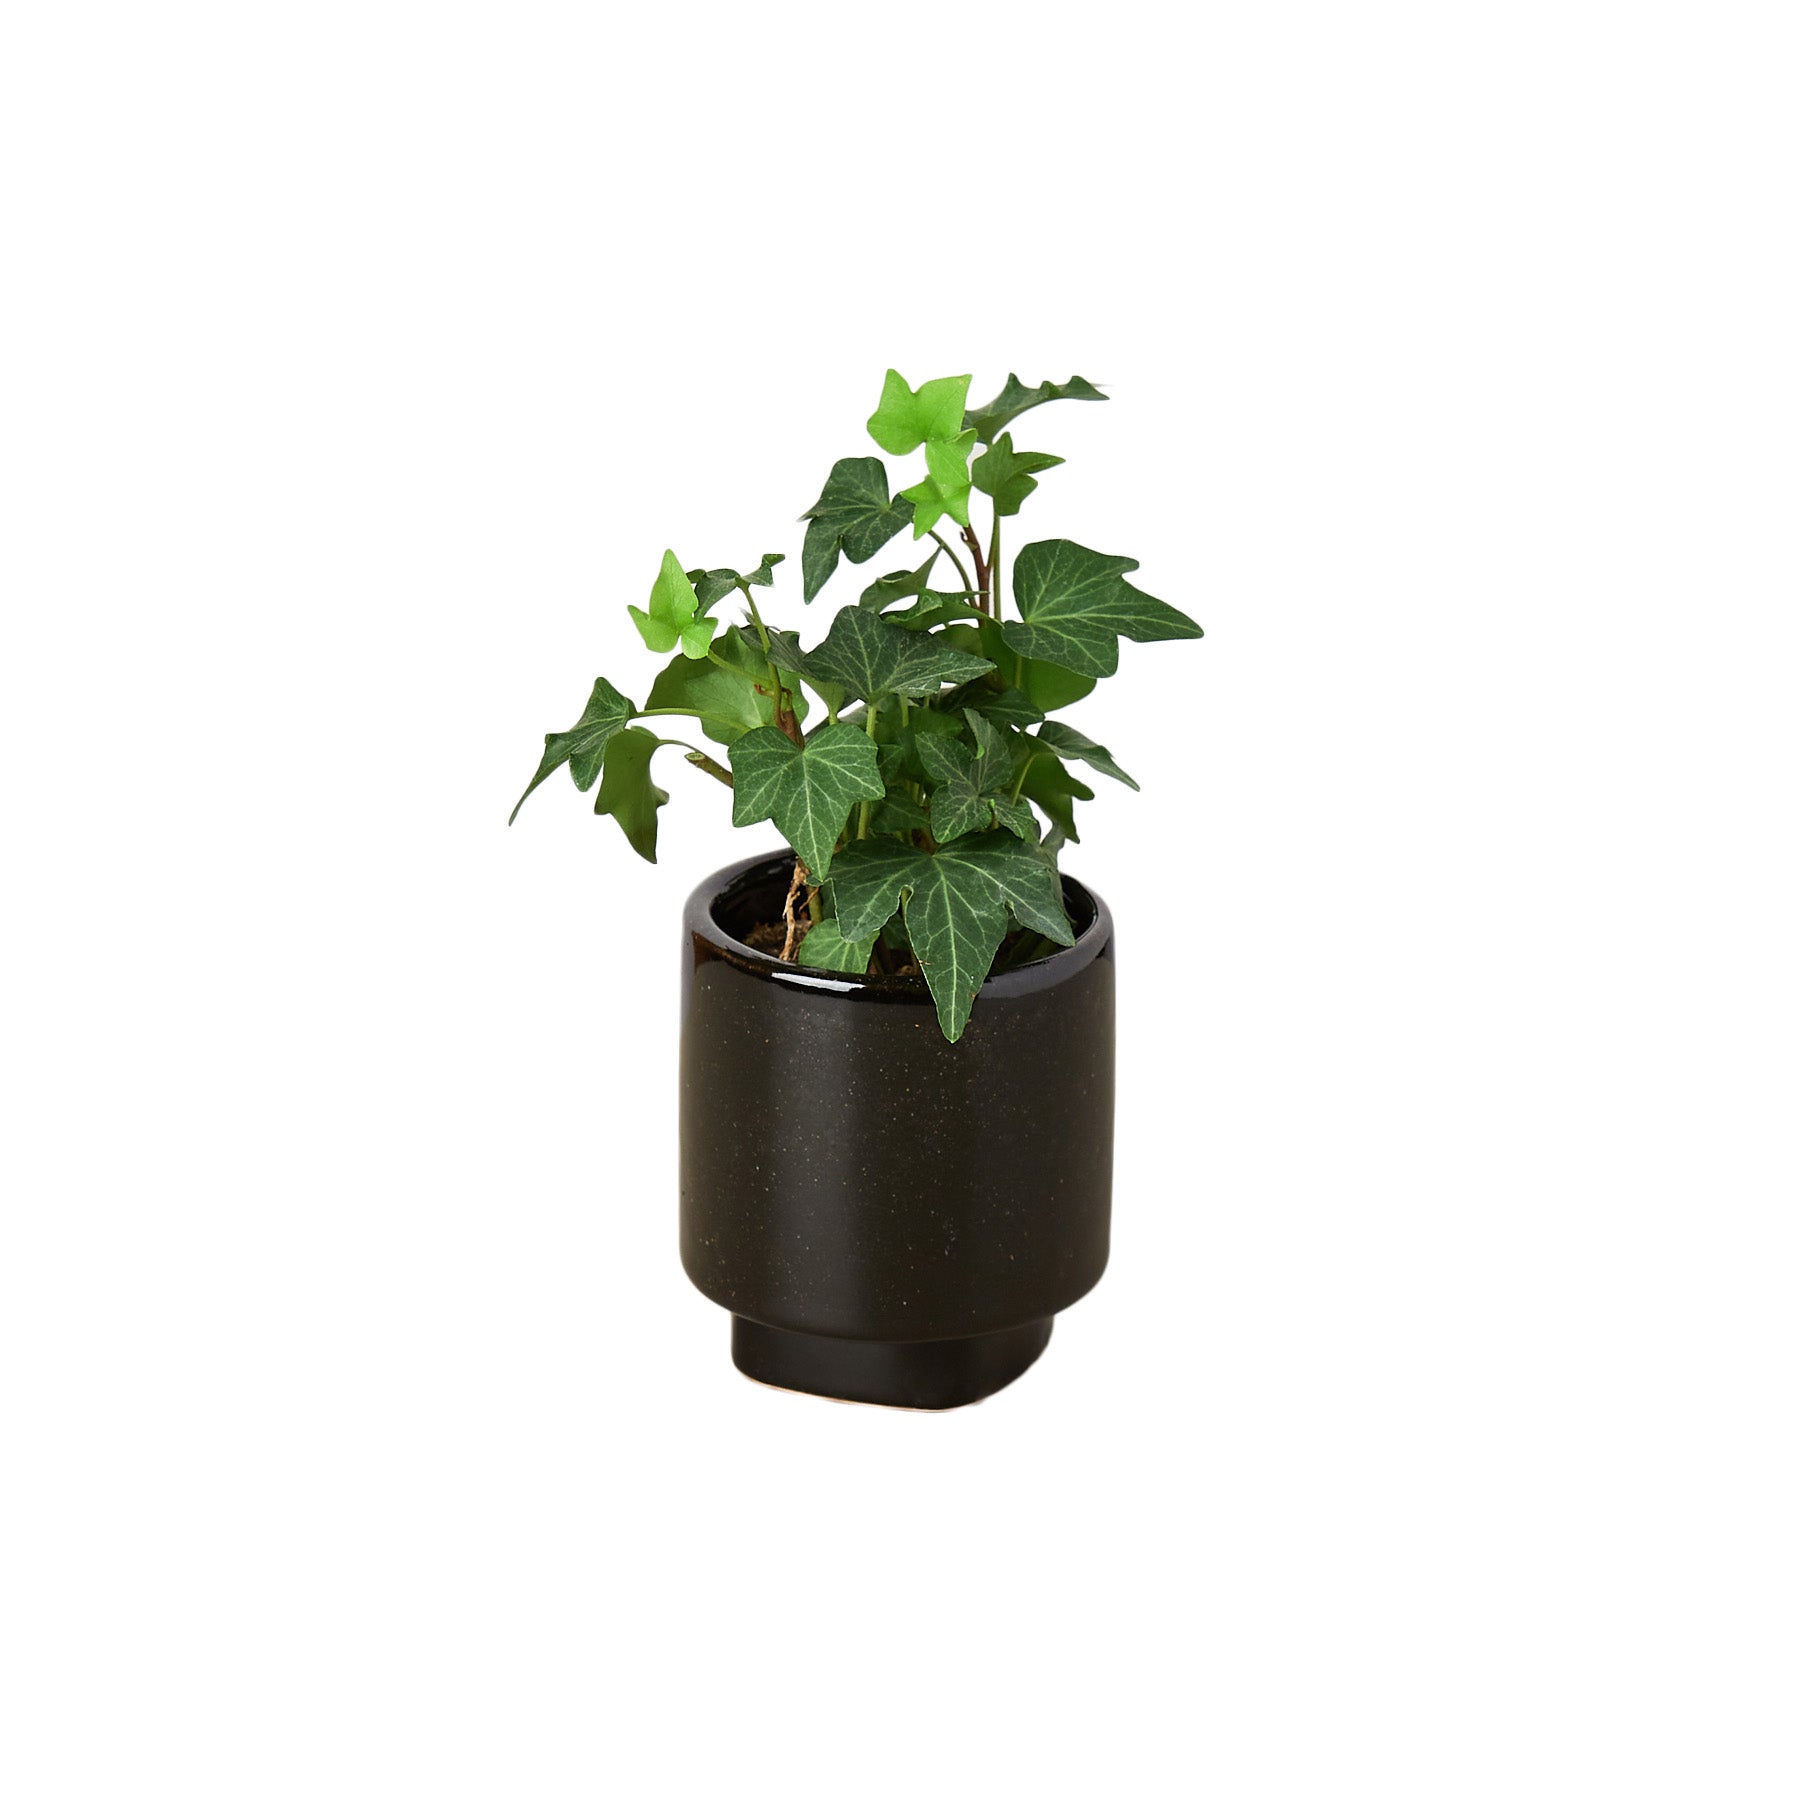 A small plant in a black pot on a white background, available at the best garden center near me.